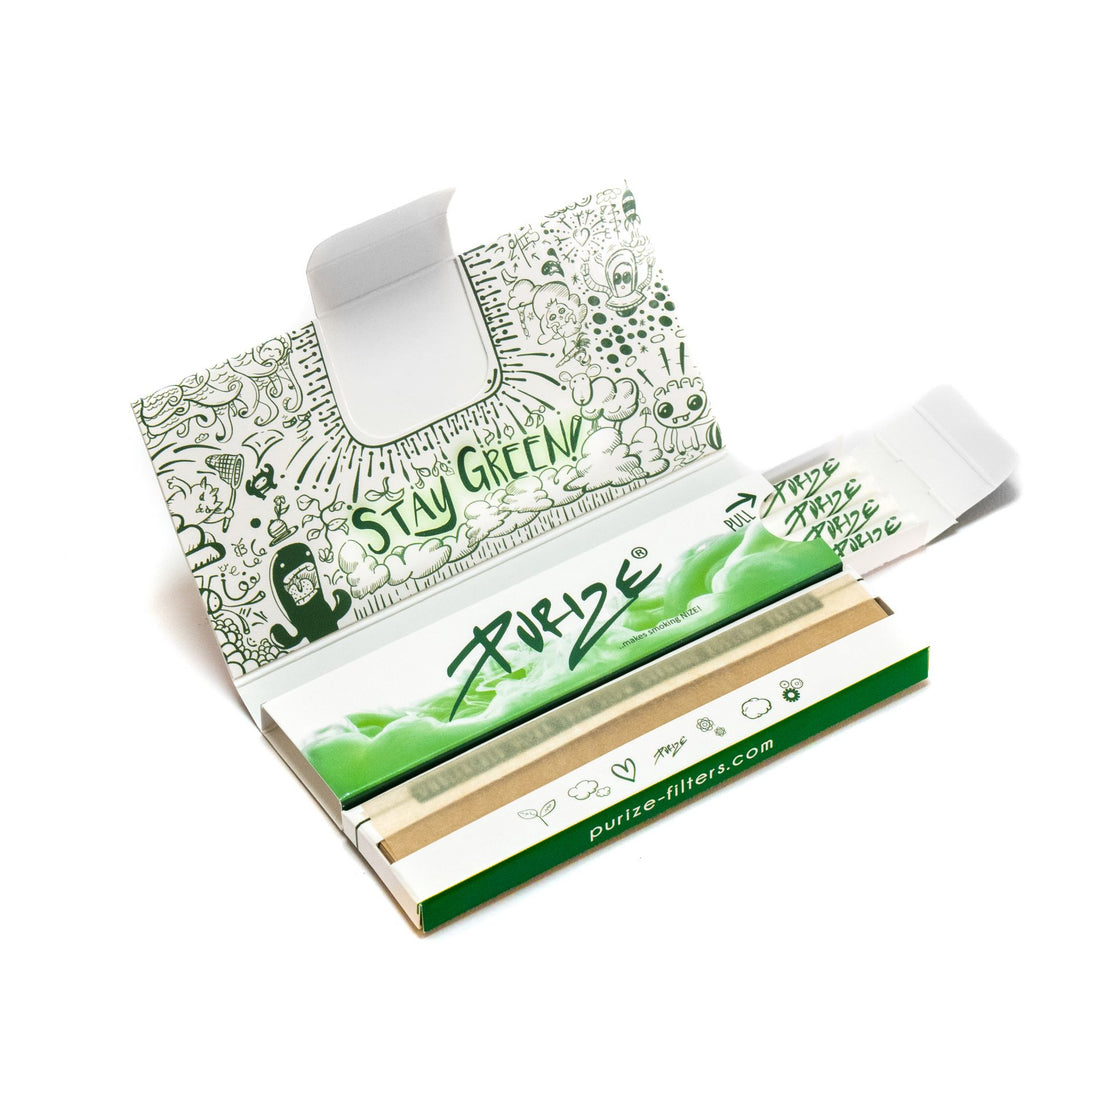 Purize Papes n Tips